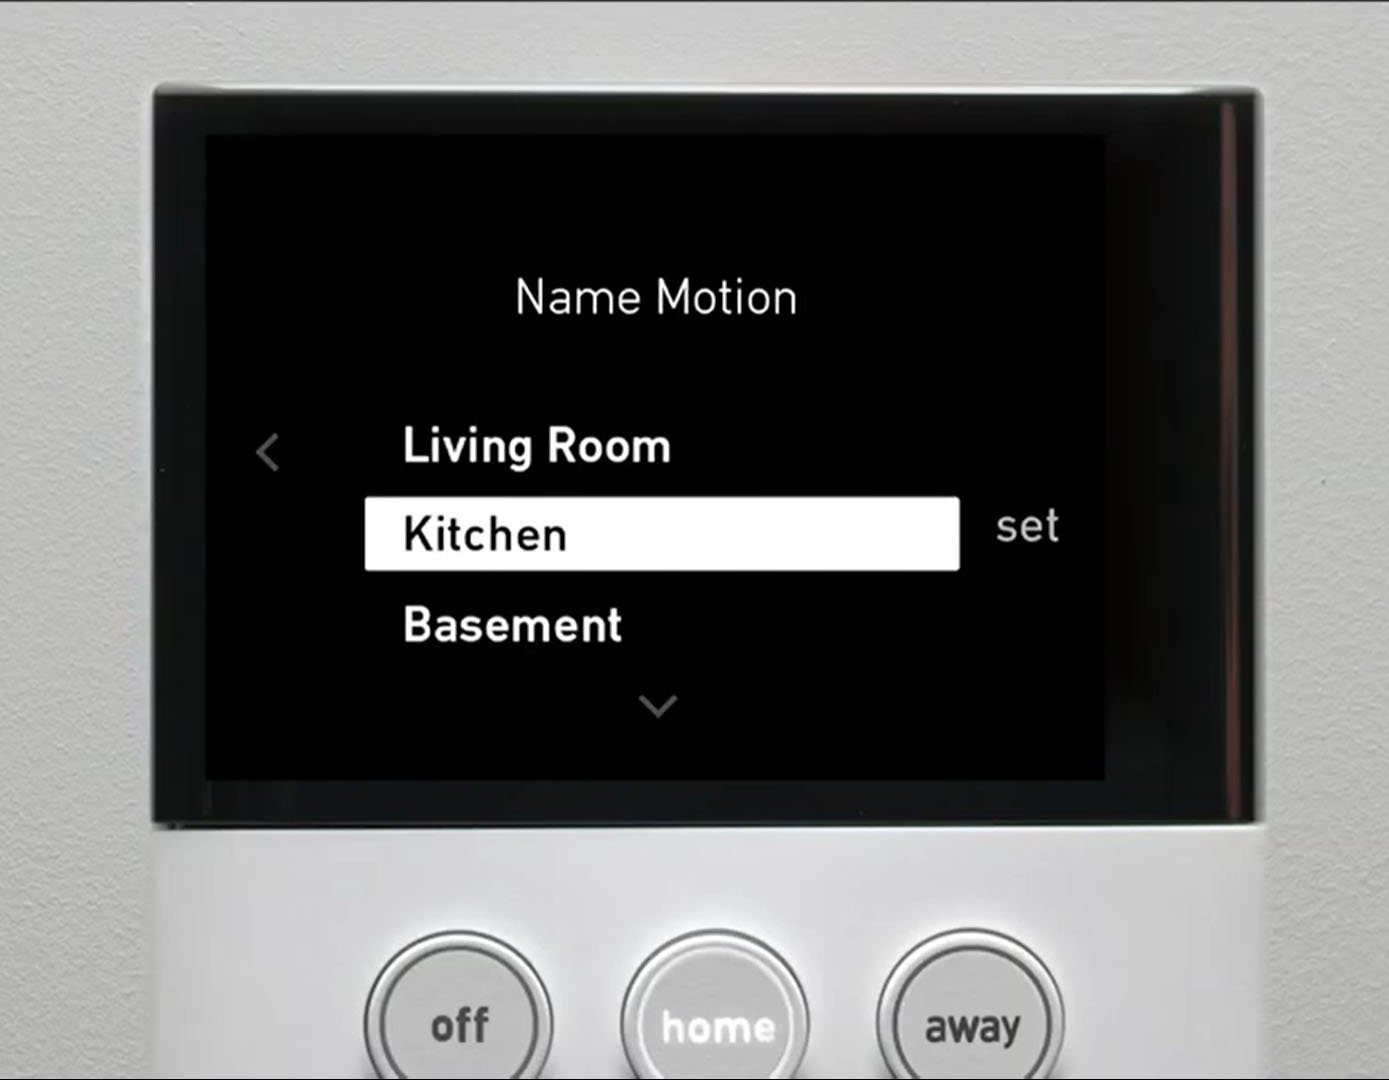 How to Install the SimpliSafe Keypad